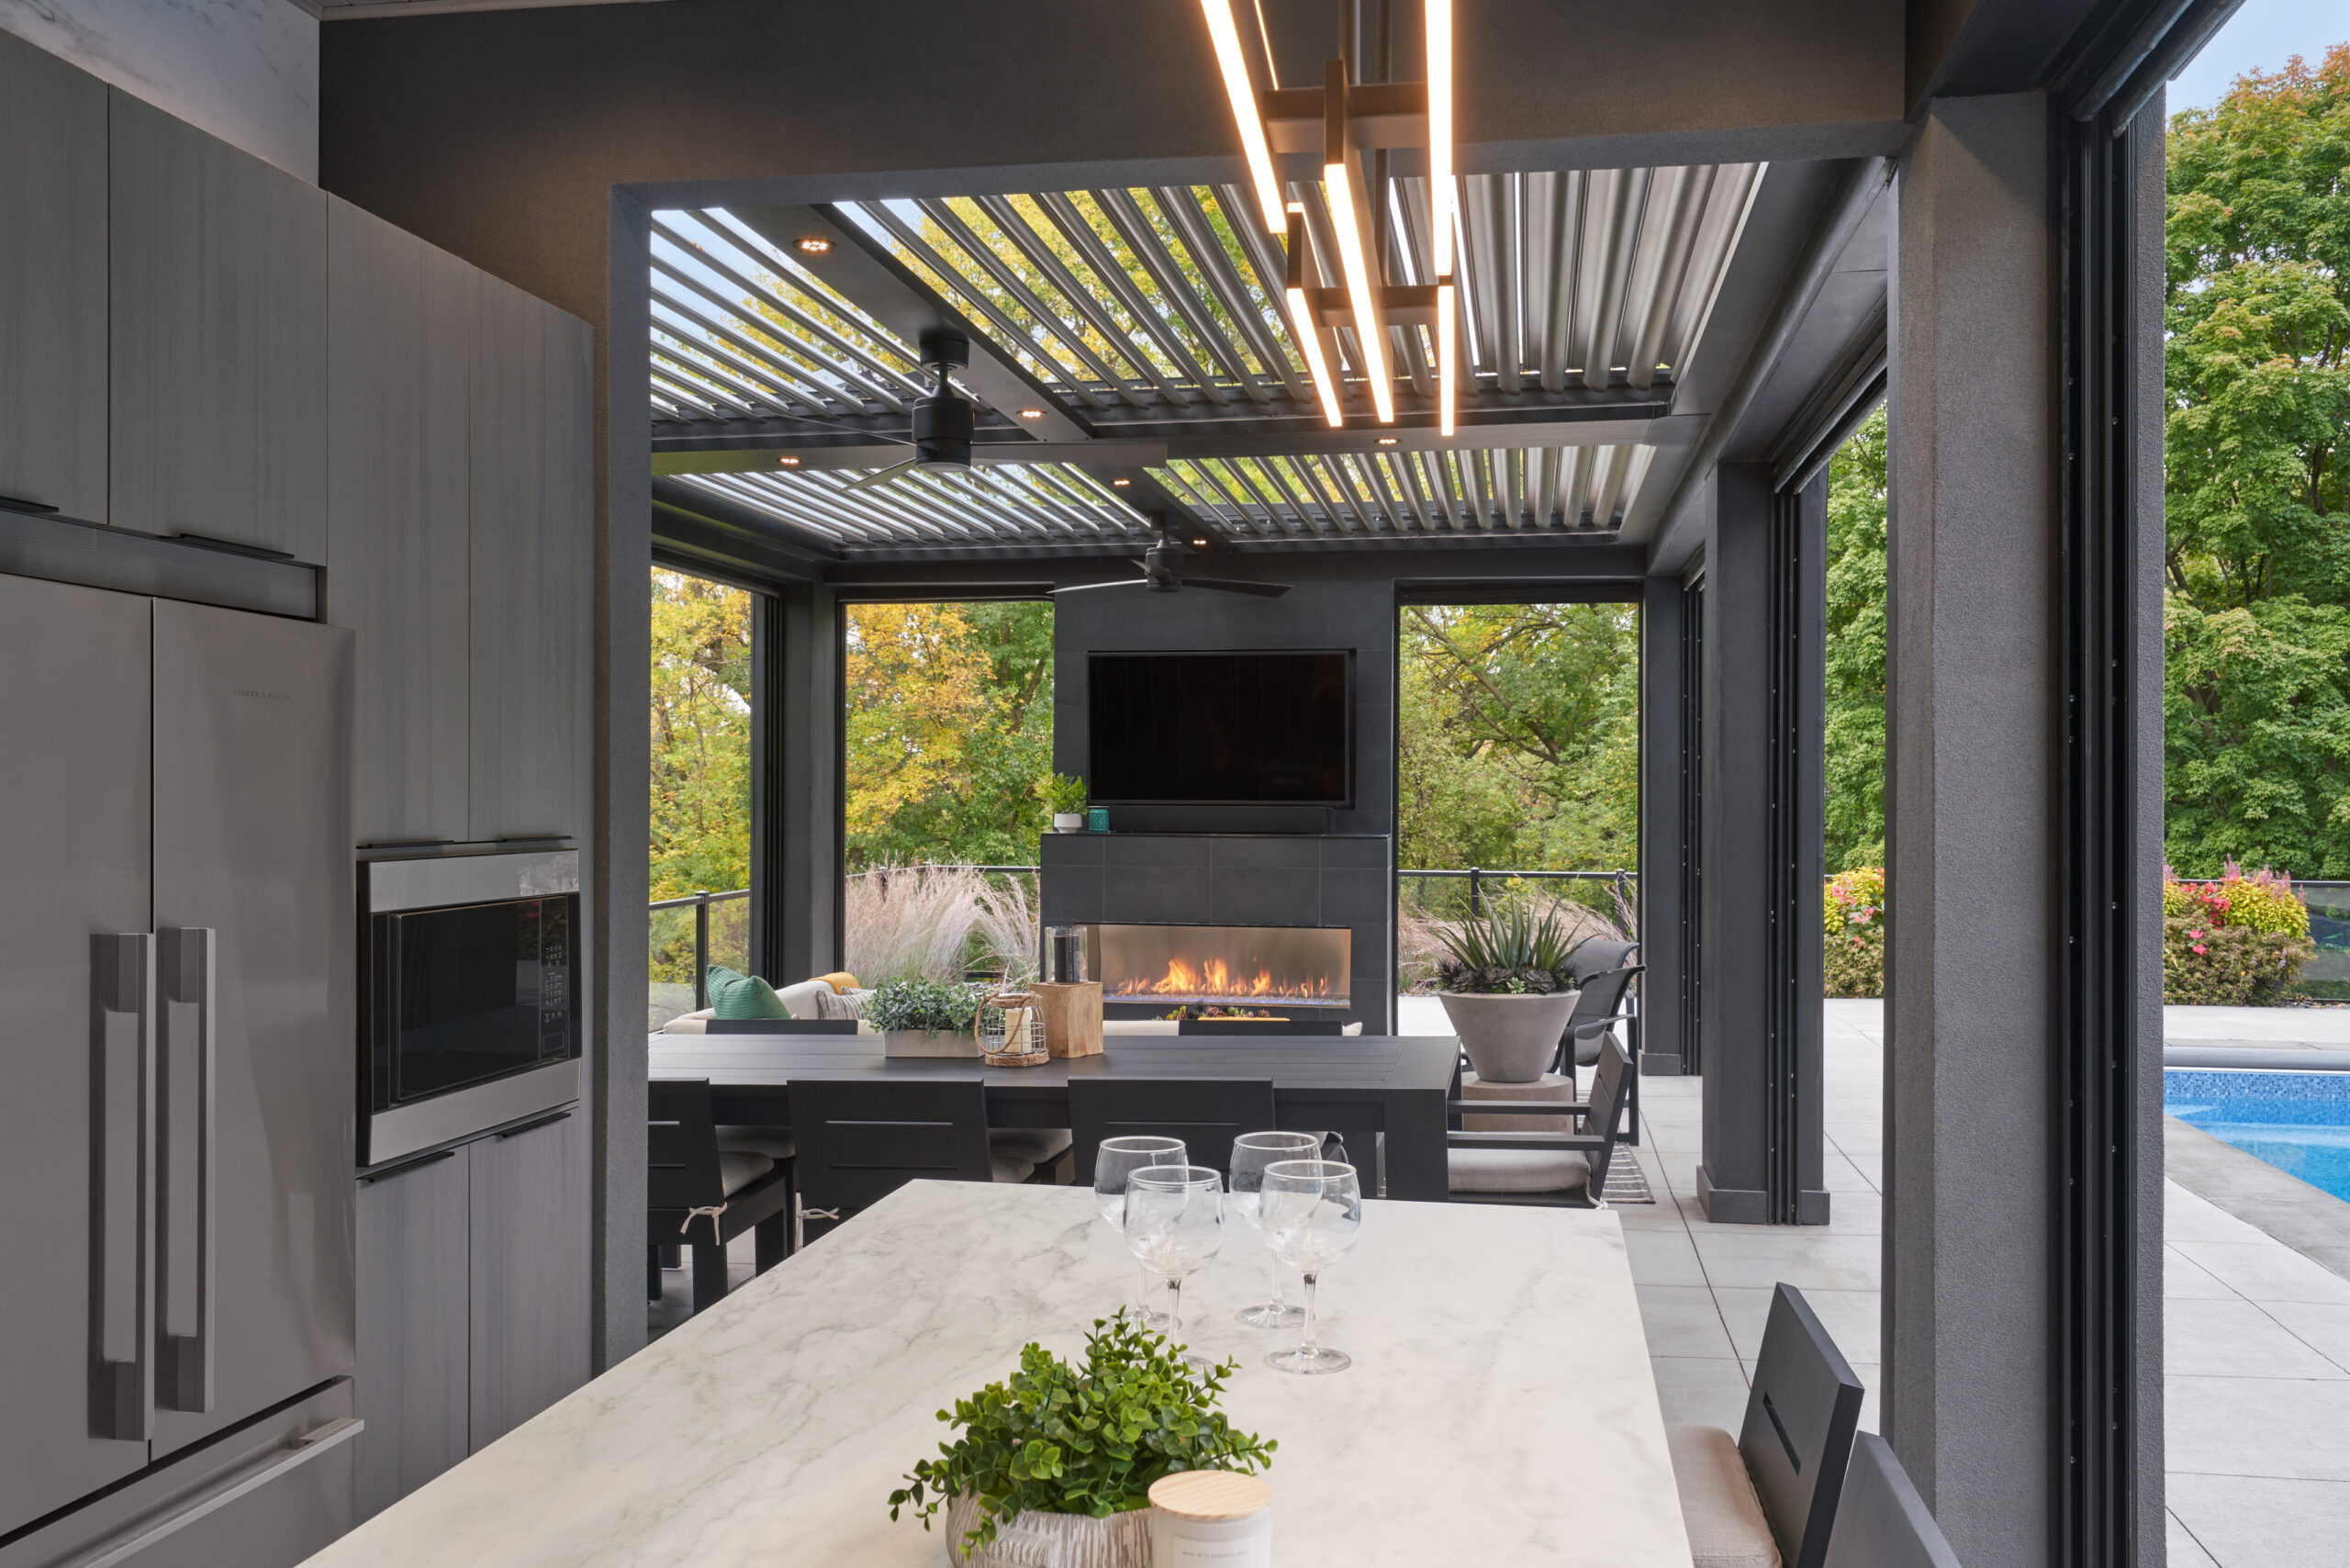 Contemporary outdoor kitchen - part of poolhouse project - Screens open.